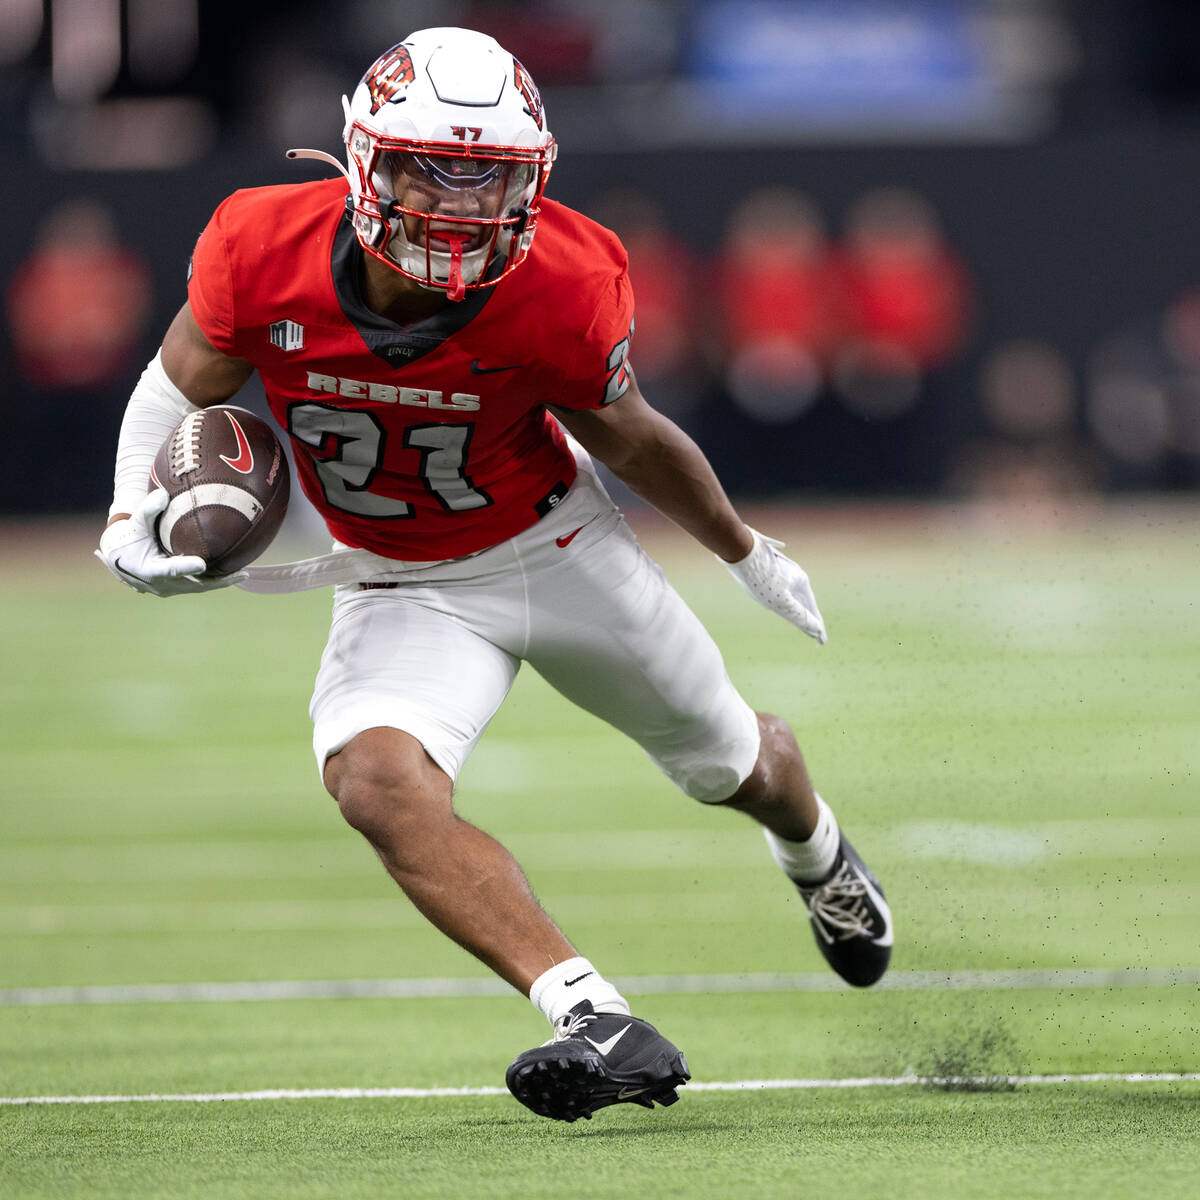 UNLV wide receiver Jacob De Jesus (21) runs the ball during the first half of an NCAA college ...